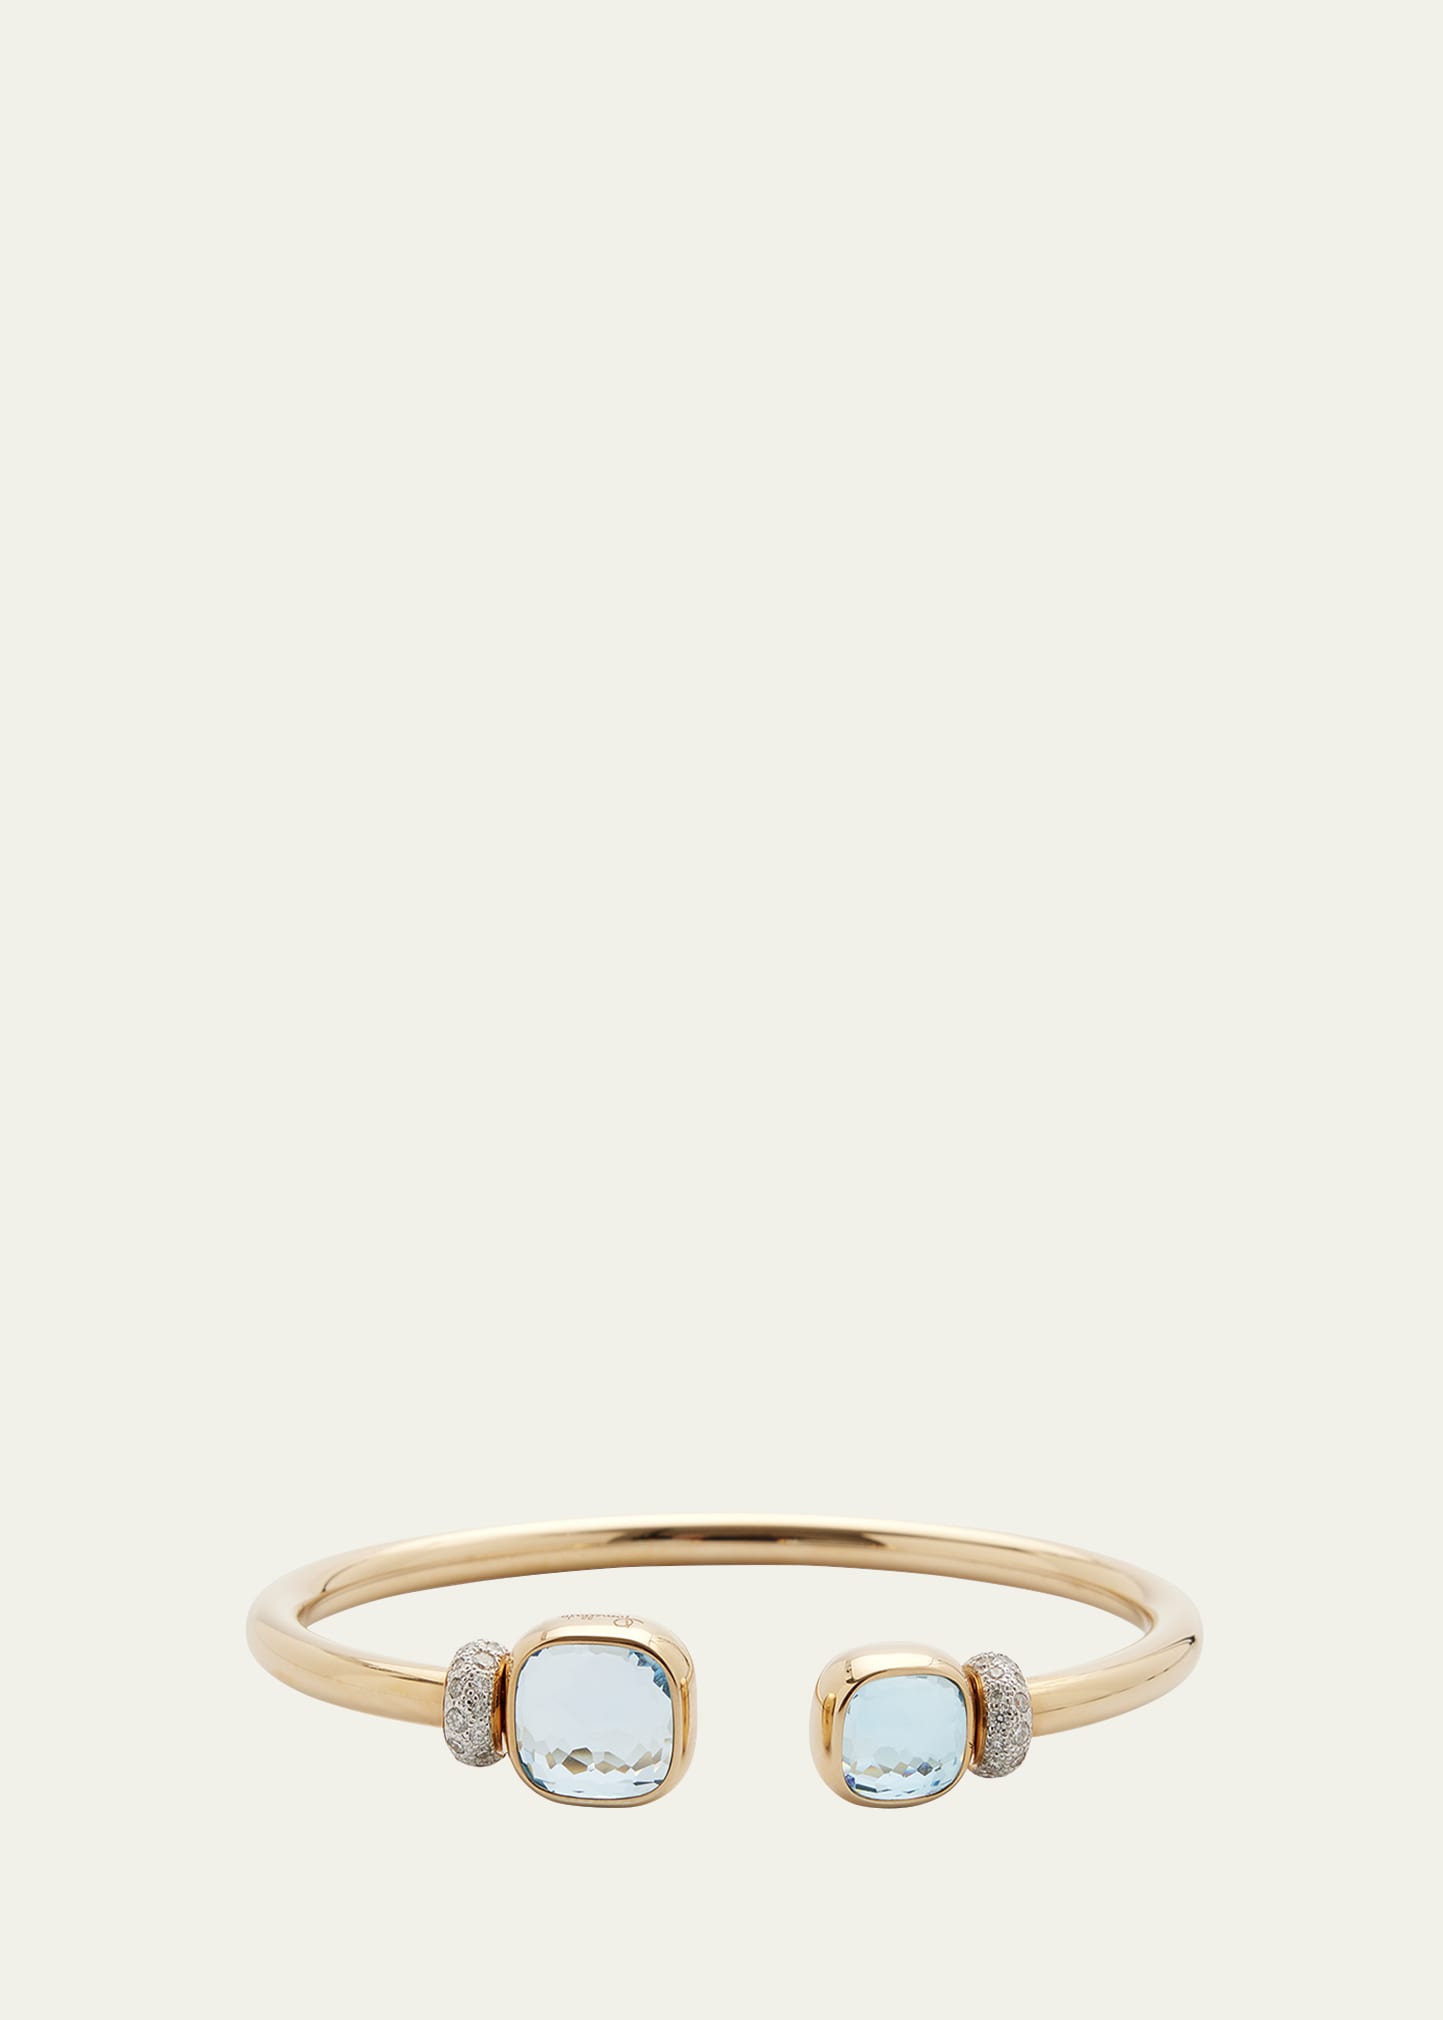 Pomellato Nudo Classic and Petit Rose Gold Bangle with Sky Blue Topaz, Size M